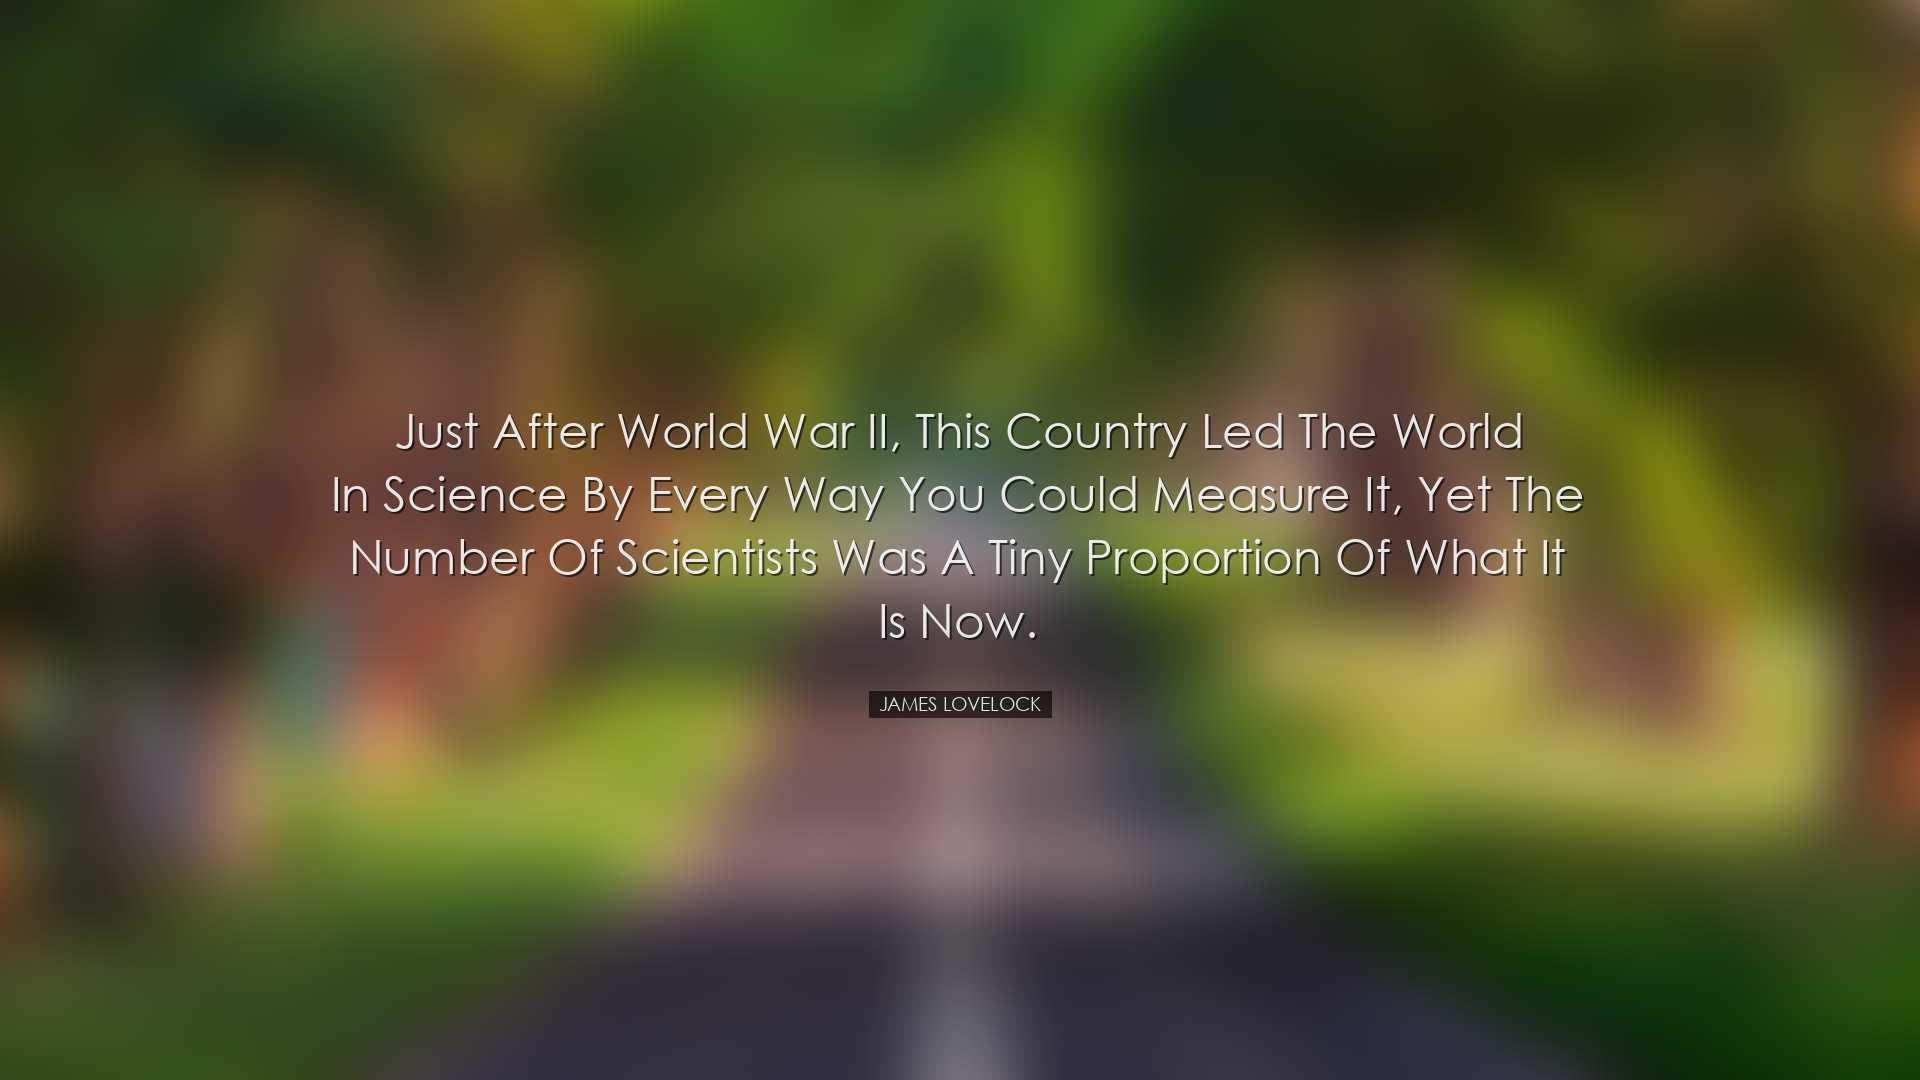 Just after World War II, this country led the world in science by